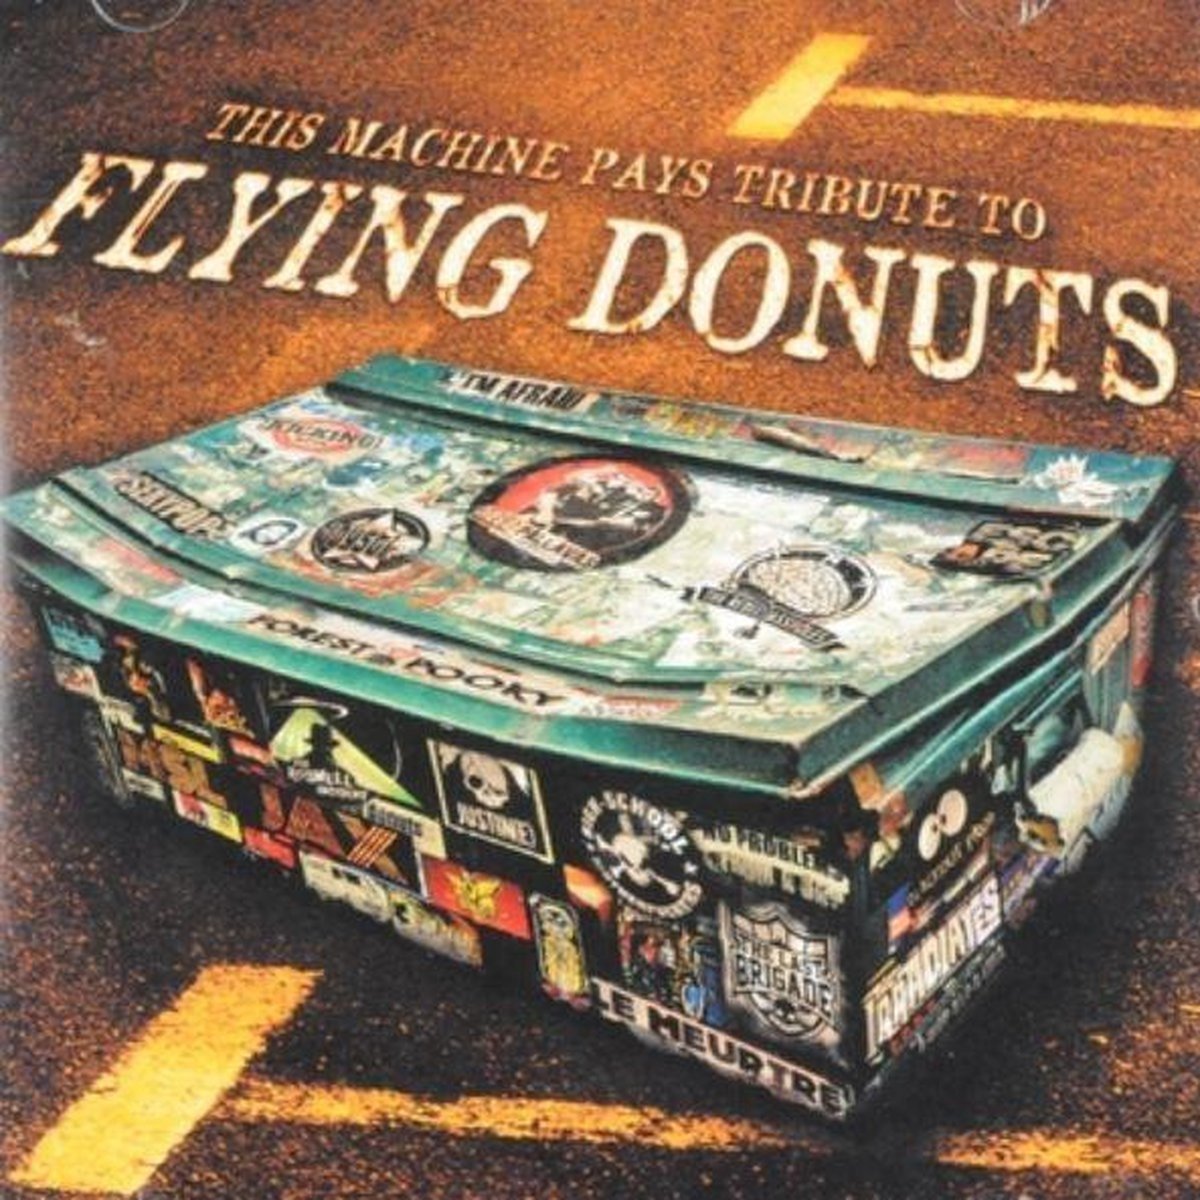 CD Shop - FLYING DONUTS.=TRIB= THIS MACHINE PAYS TRIBUTE TO FLYING DONUTS